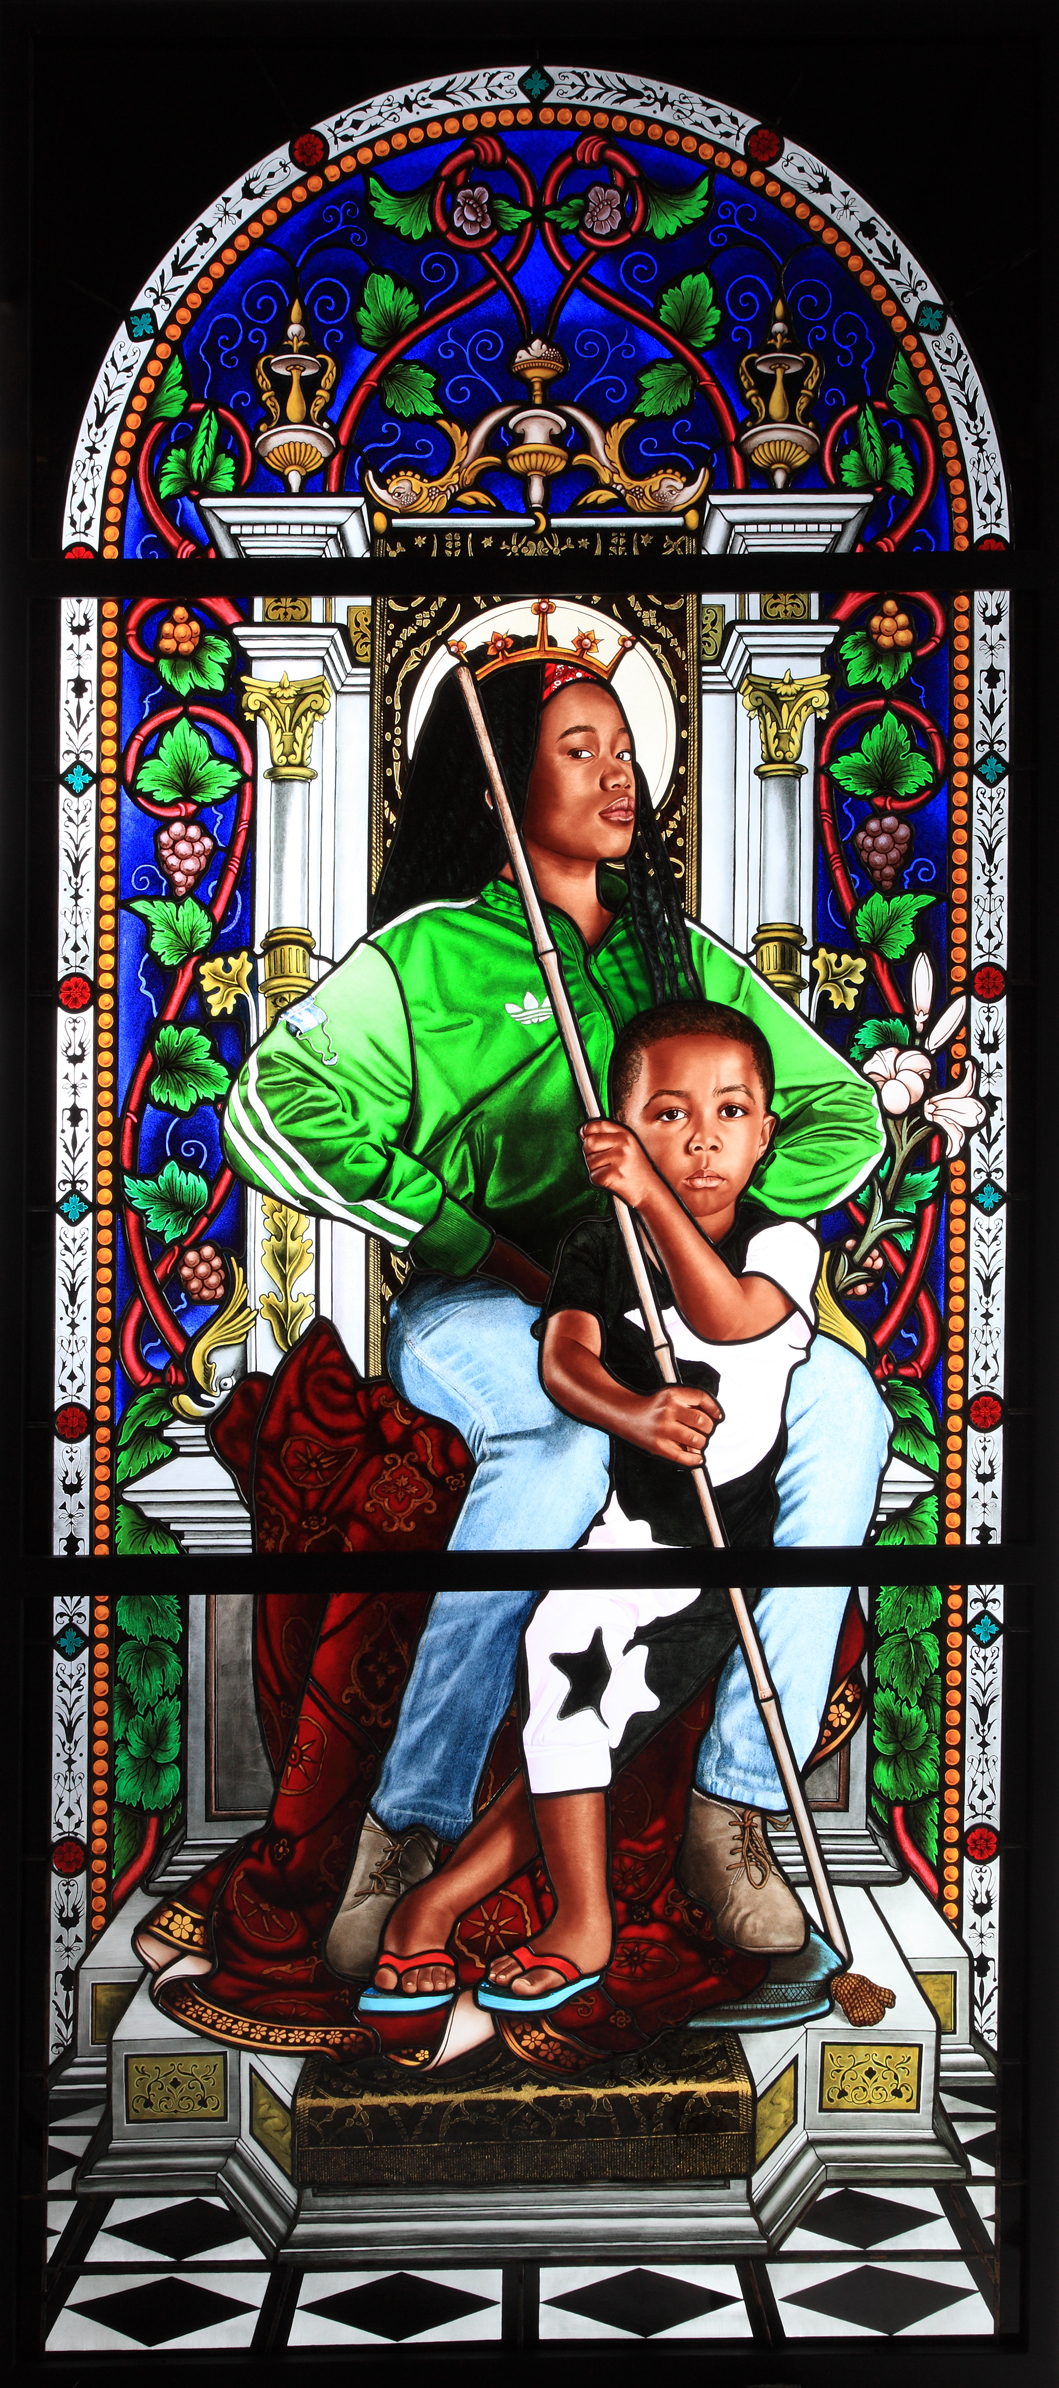 Kehinde Wiley | Lamentation, Le Petit Palais, Paris, France, October 20, 2016 - January 15, 2017 | Madonna and Child, 2016 Stained Glass in an Aluminum Frame. | 10